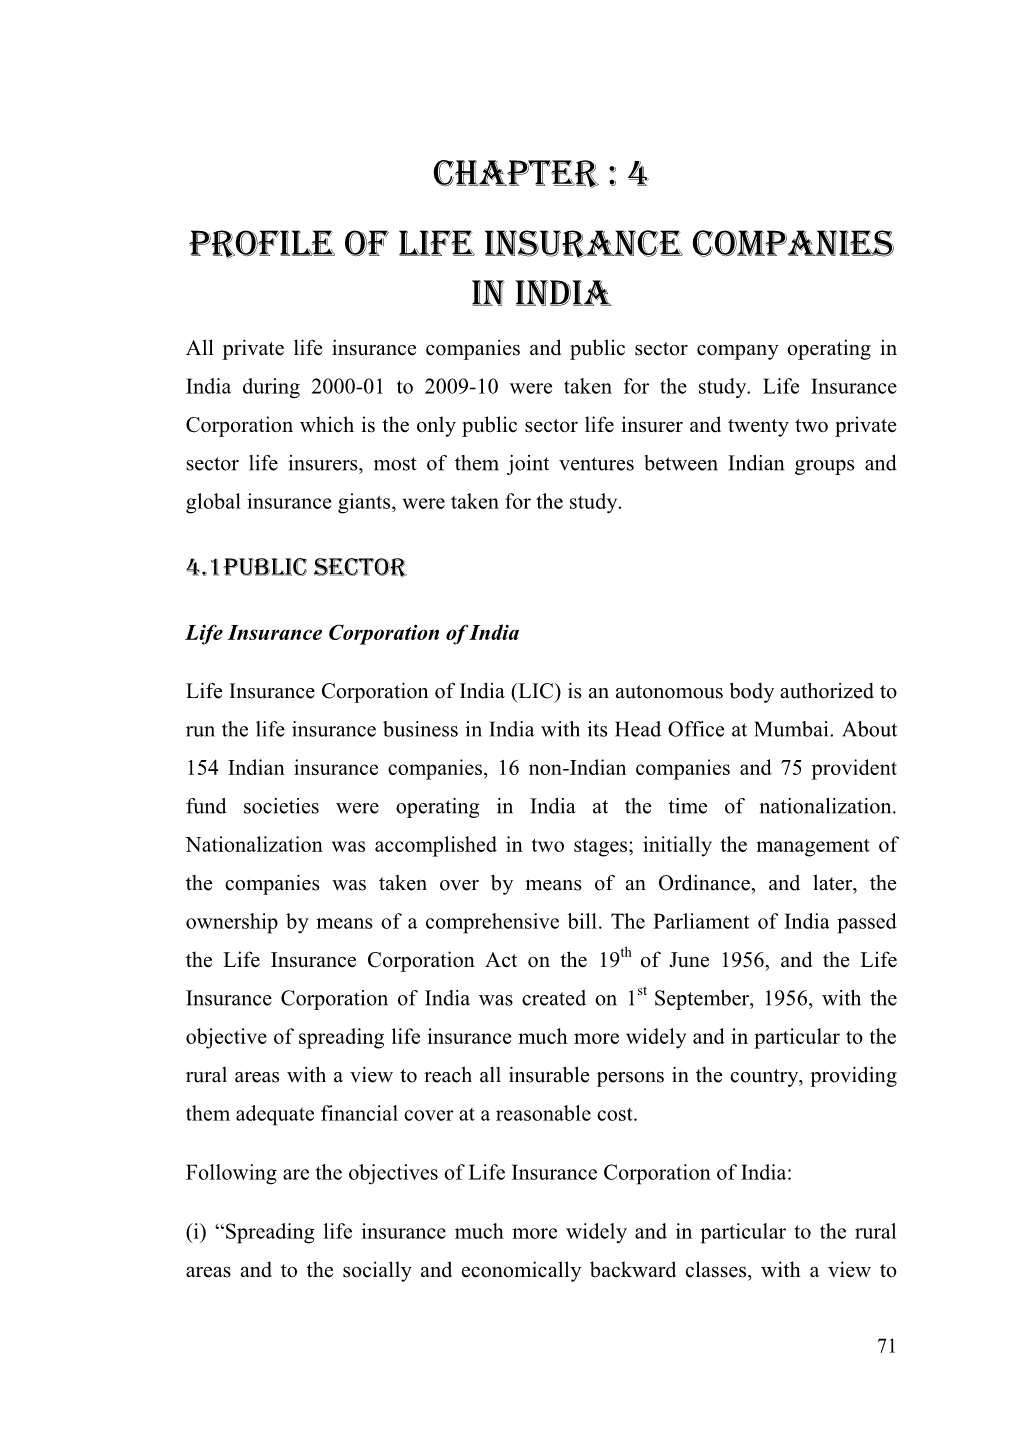 Chapter : 4 Profile of Life Insurance Companies in India